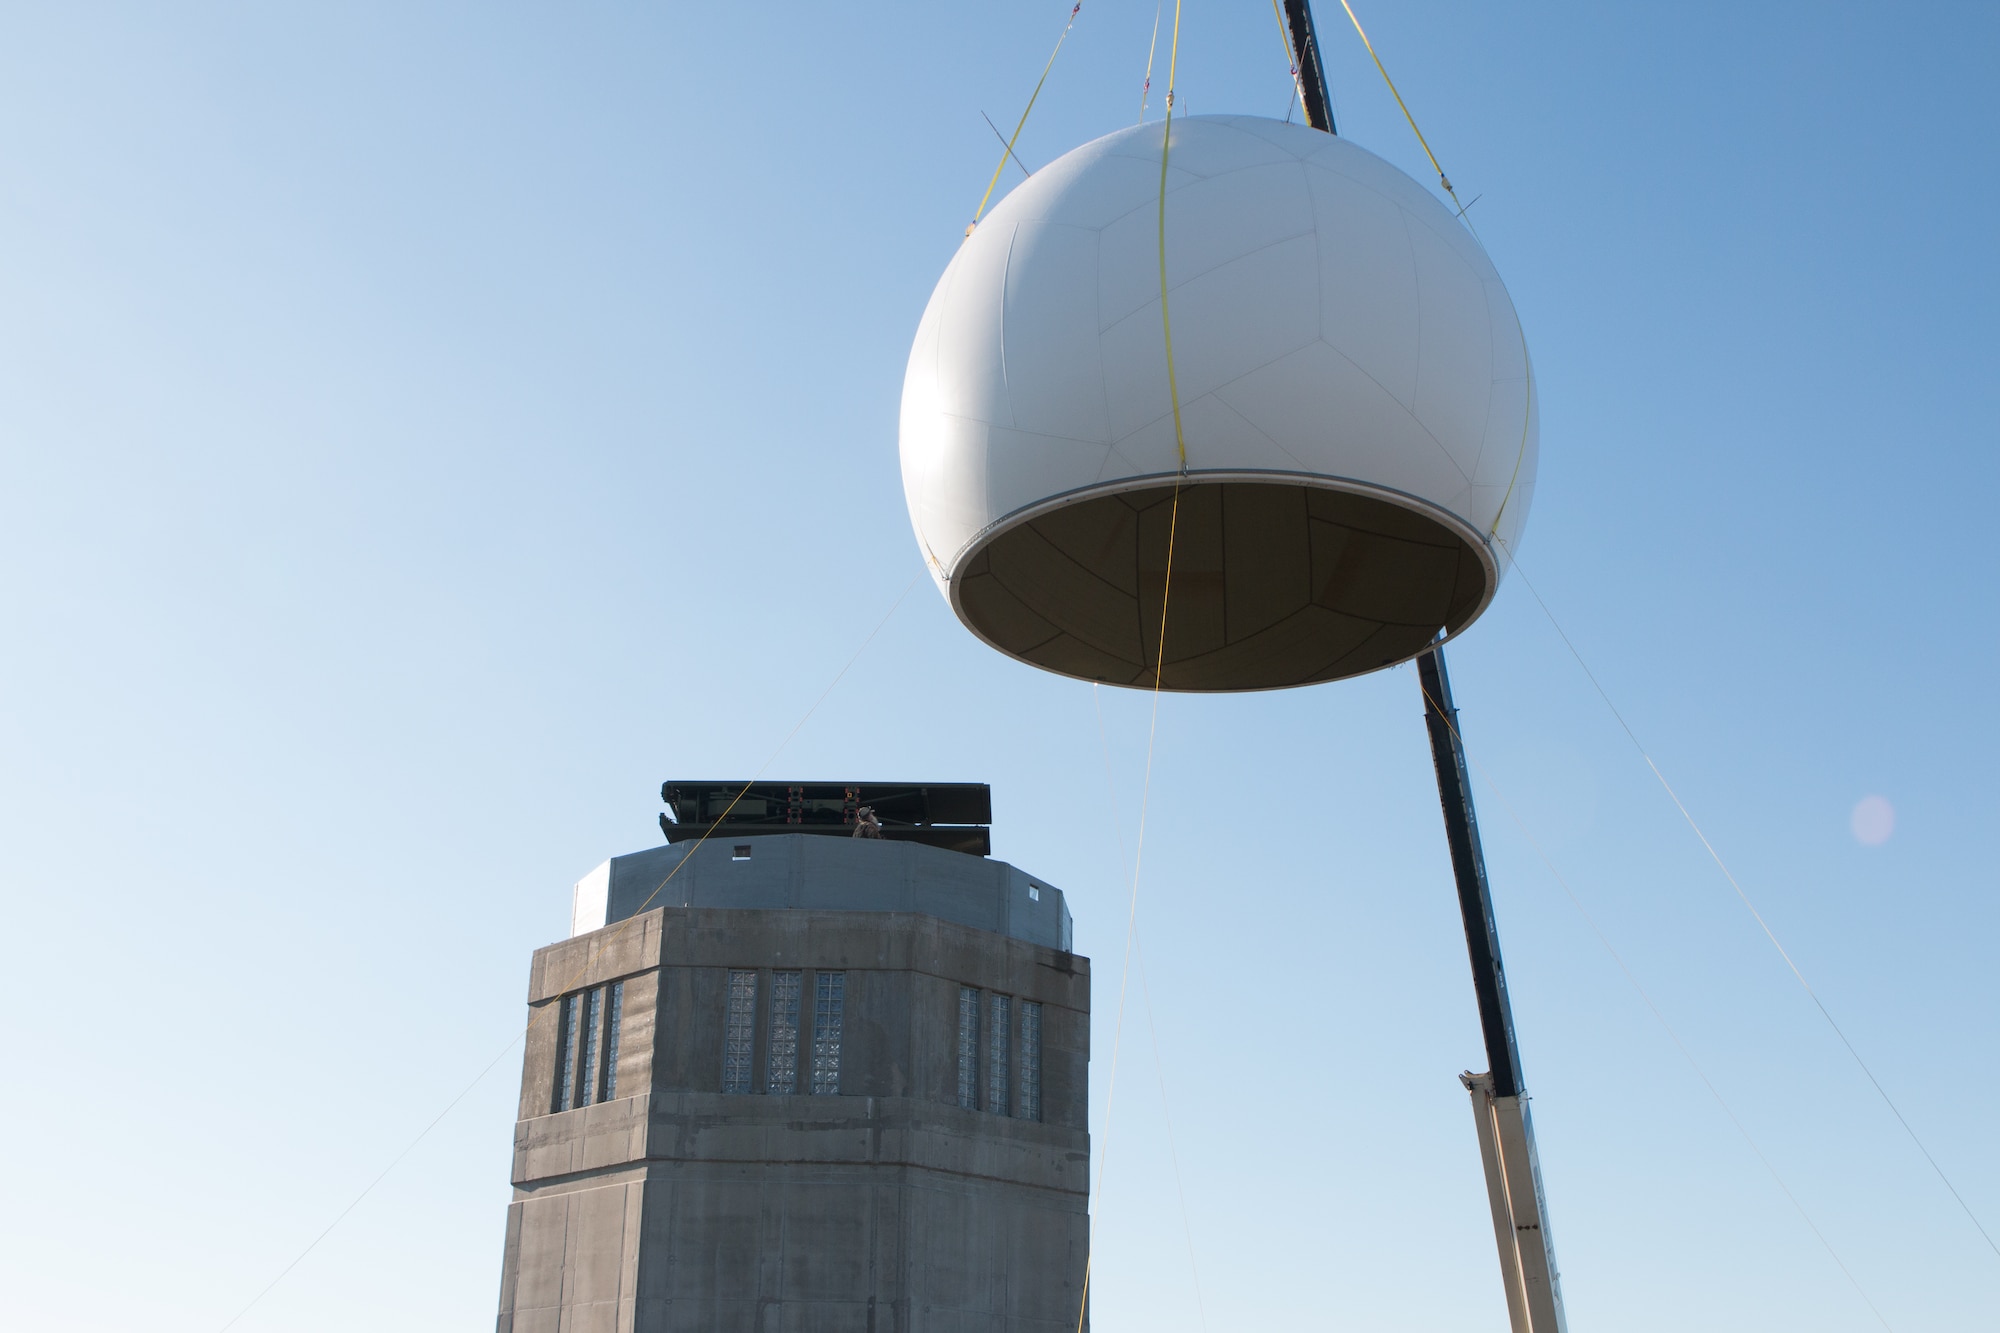 Airmen from the 103rd Air Control Squadron raise a fiber composite radome on to the radar tower at the Orange Air National Guard Station, Orange, Conn., Oct. 25, 2014.  The maintenance free radome, which gets its name from a blend of the words radar and dome, is a protective shield that encompasses a radar antenna to eliminate the need to fold and protect the $2 million antenna within from possible wind damage during severe weather.  (Photo courtesy of Senior Master Sgt. Keith Haessly)